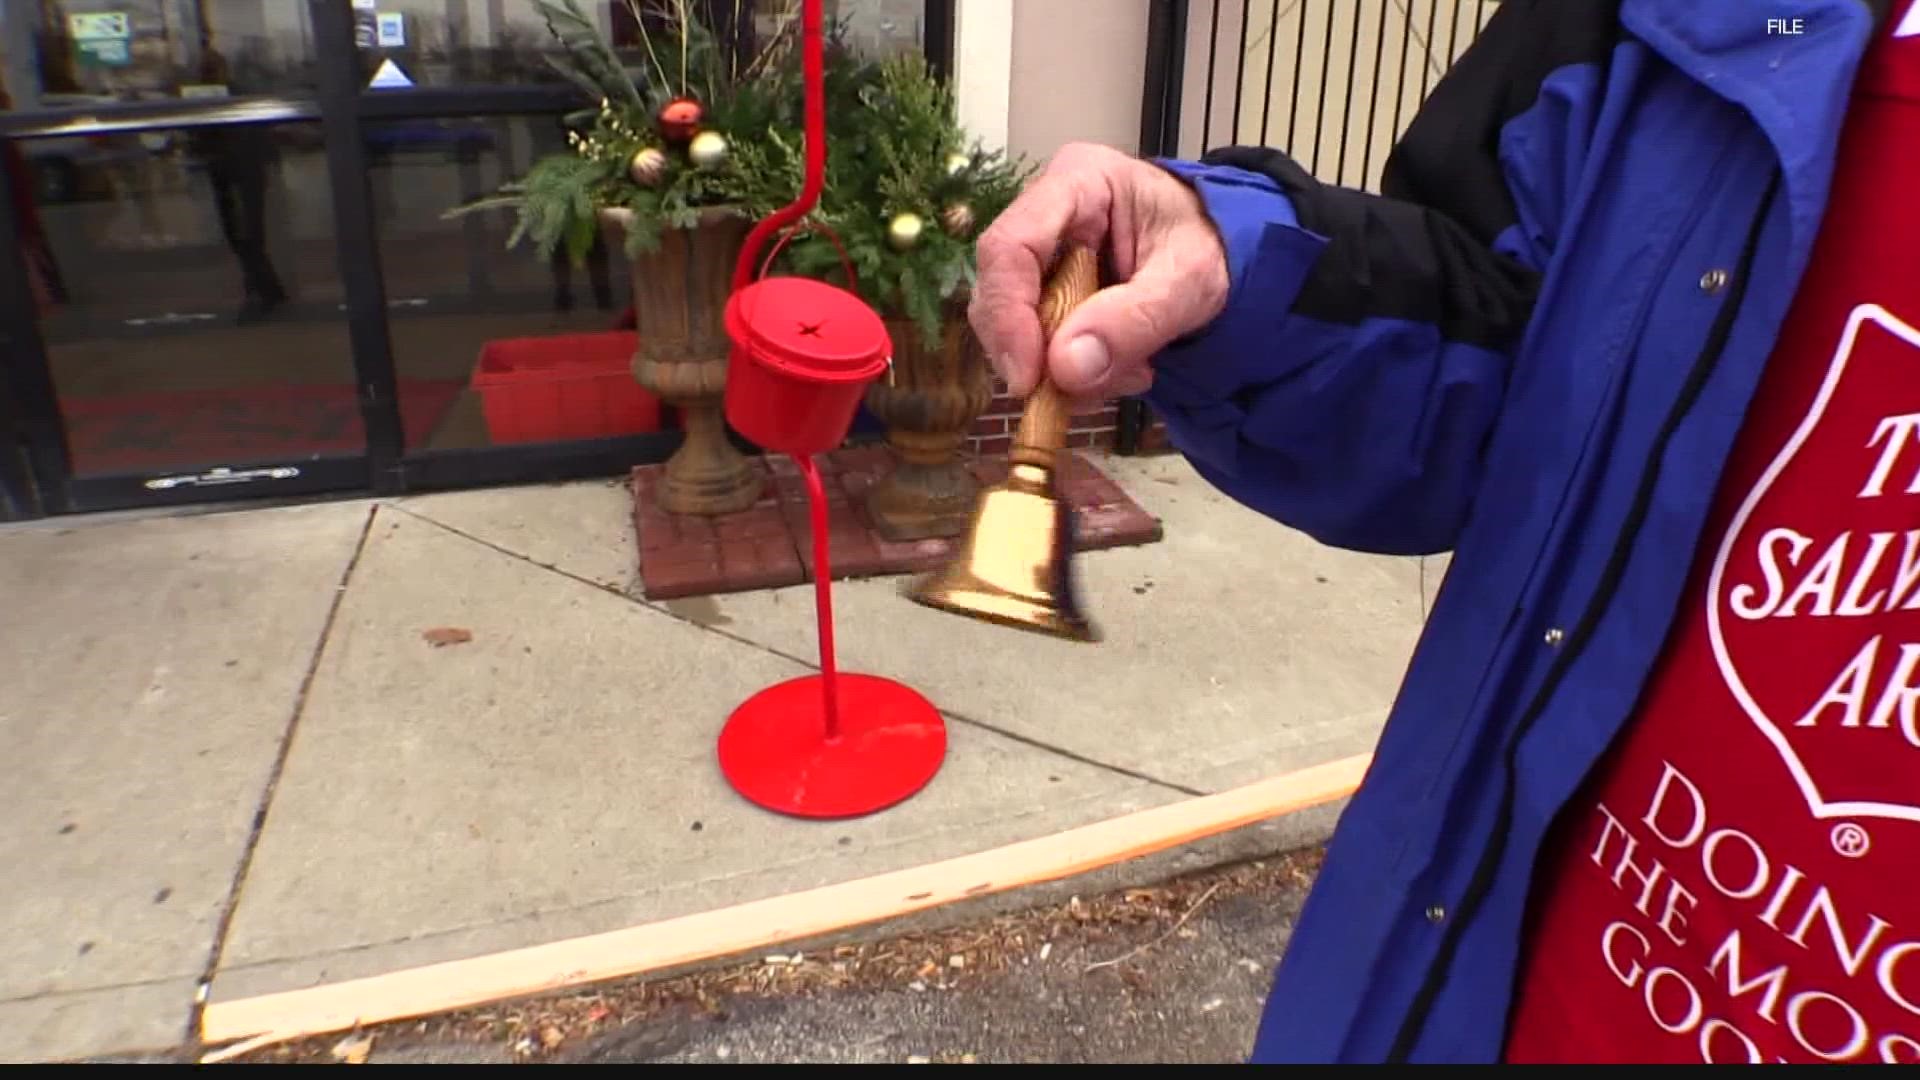 You'll start hearing bell ringers today, and by Black Friday they'll be out in full force with 150 locations around Central Indiana.